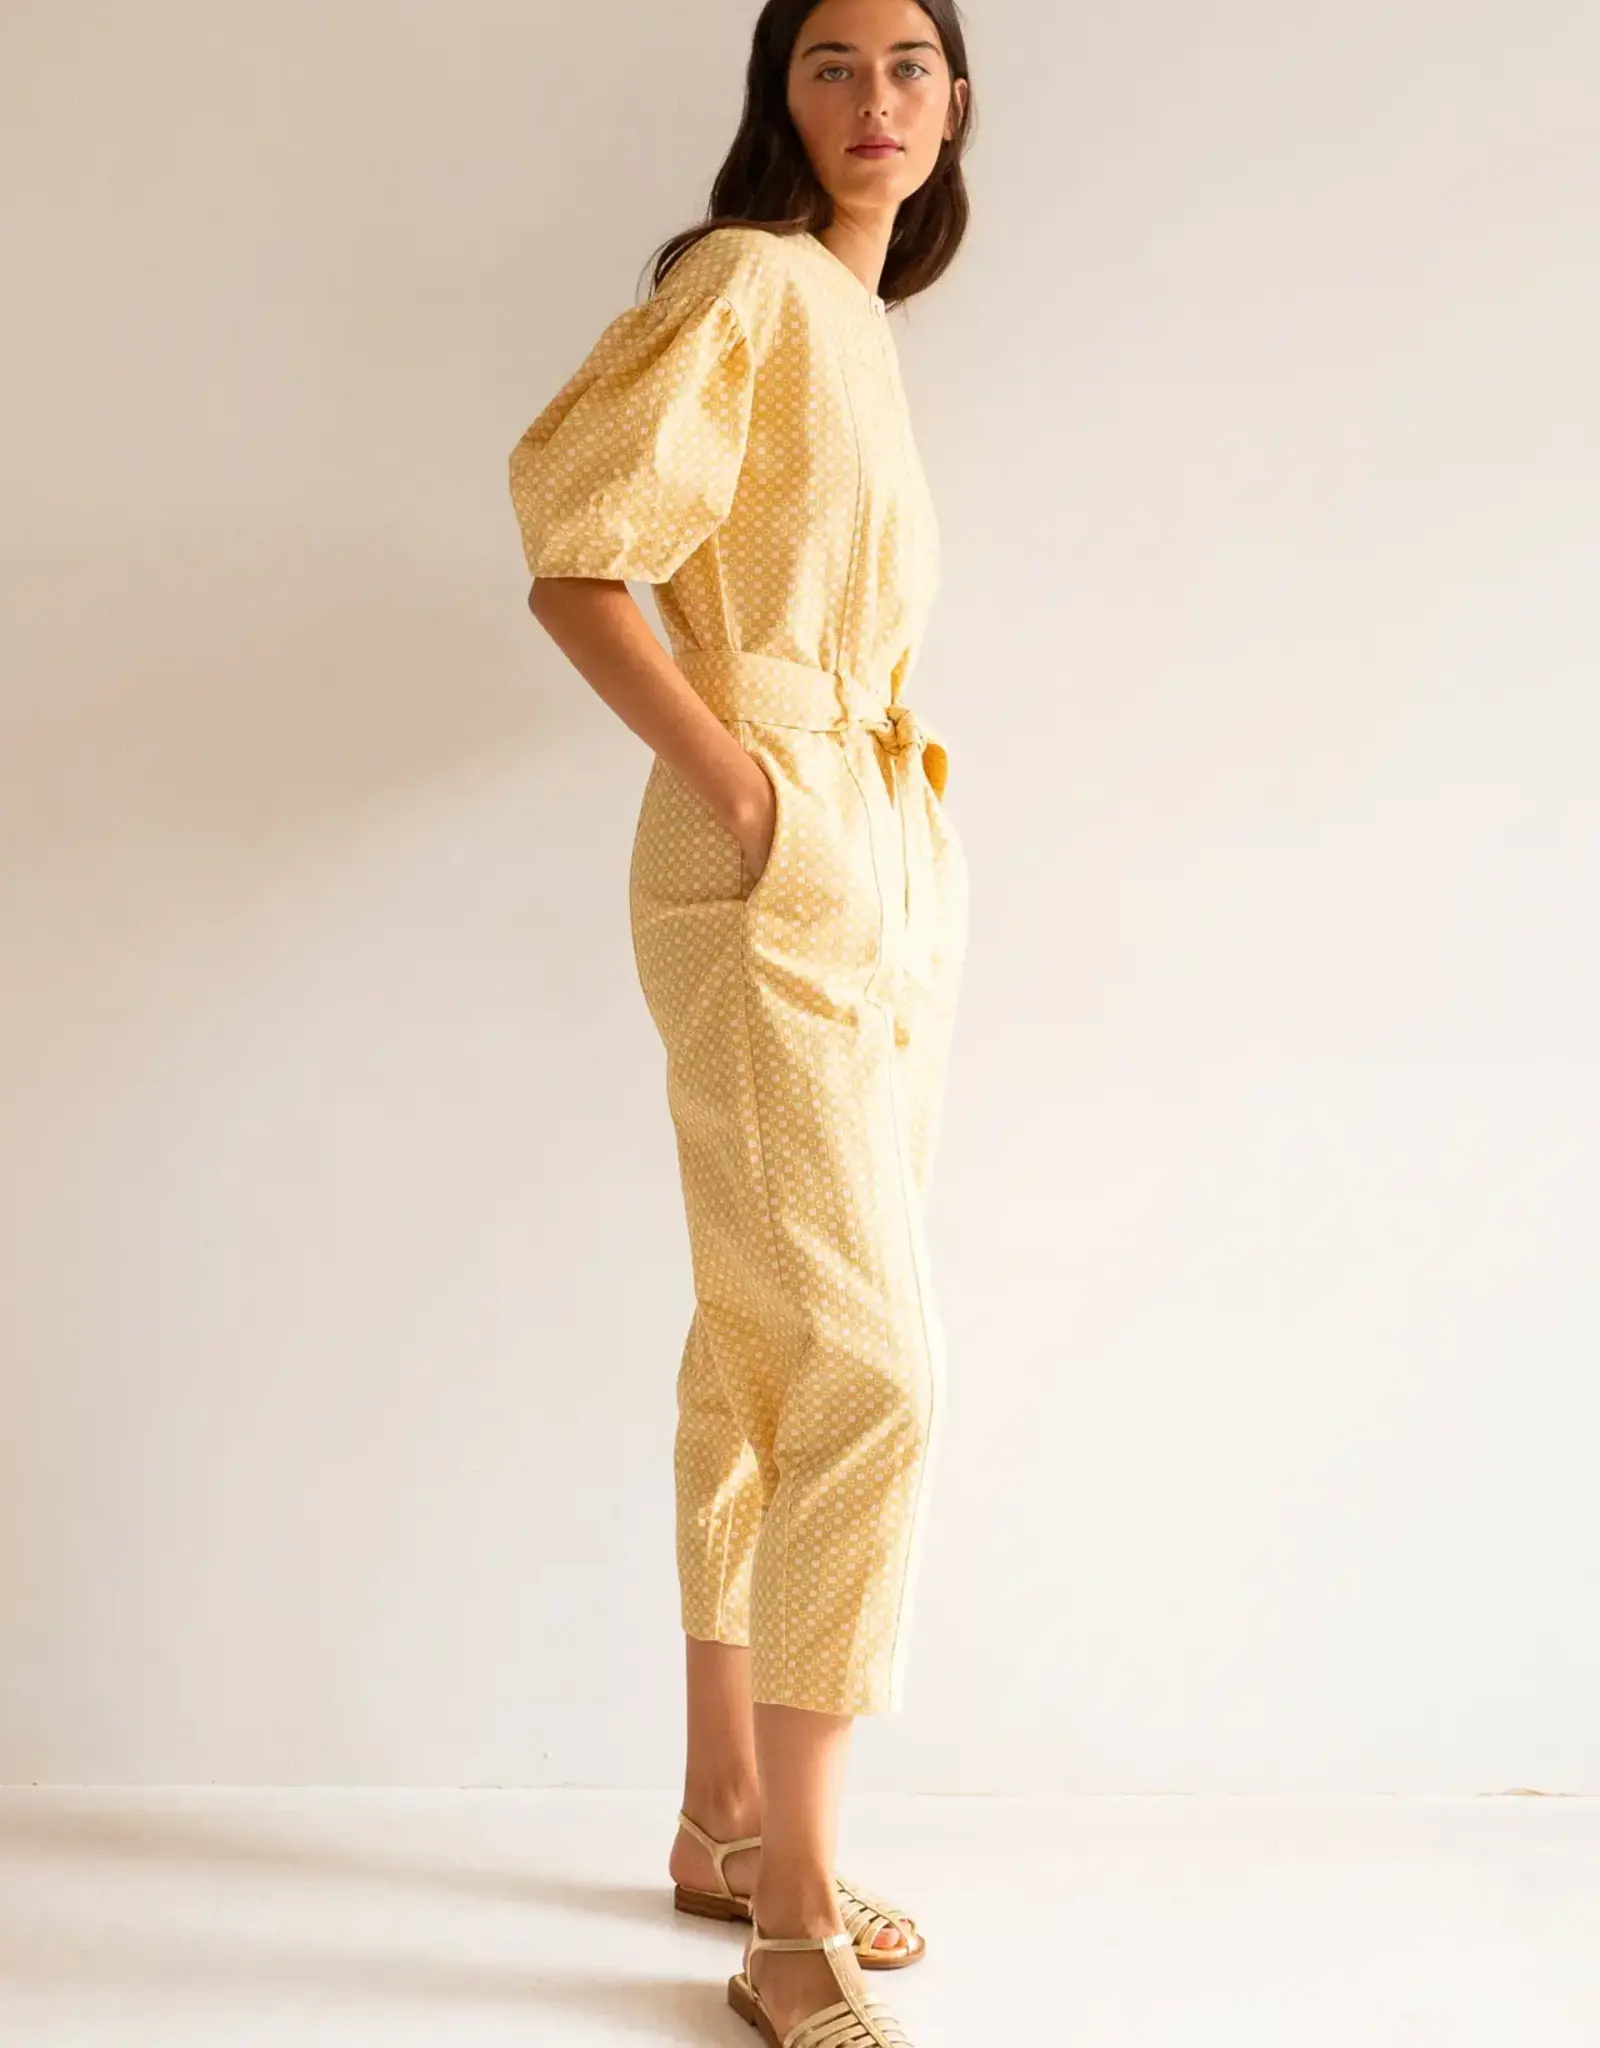 The Tiny Big Sister Jumpsuit 'Jacquard' - Off White/Pale Ochre - The Tiny Big Sister